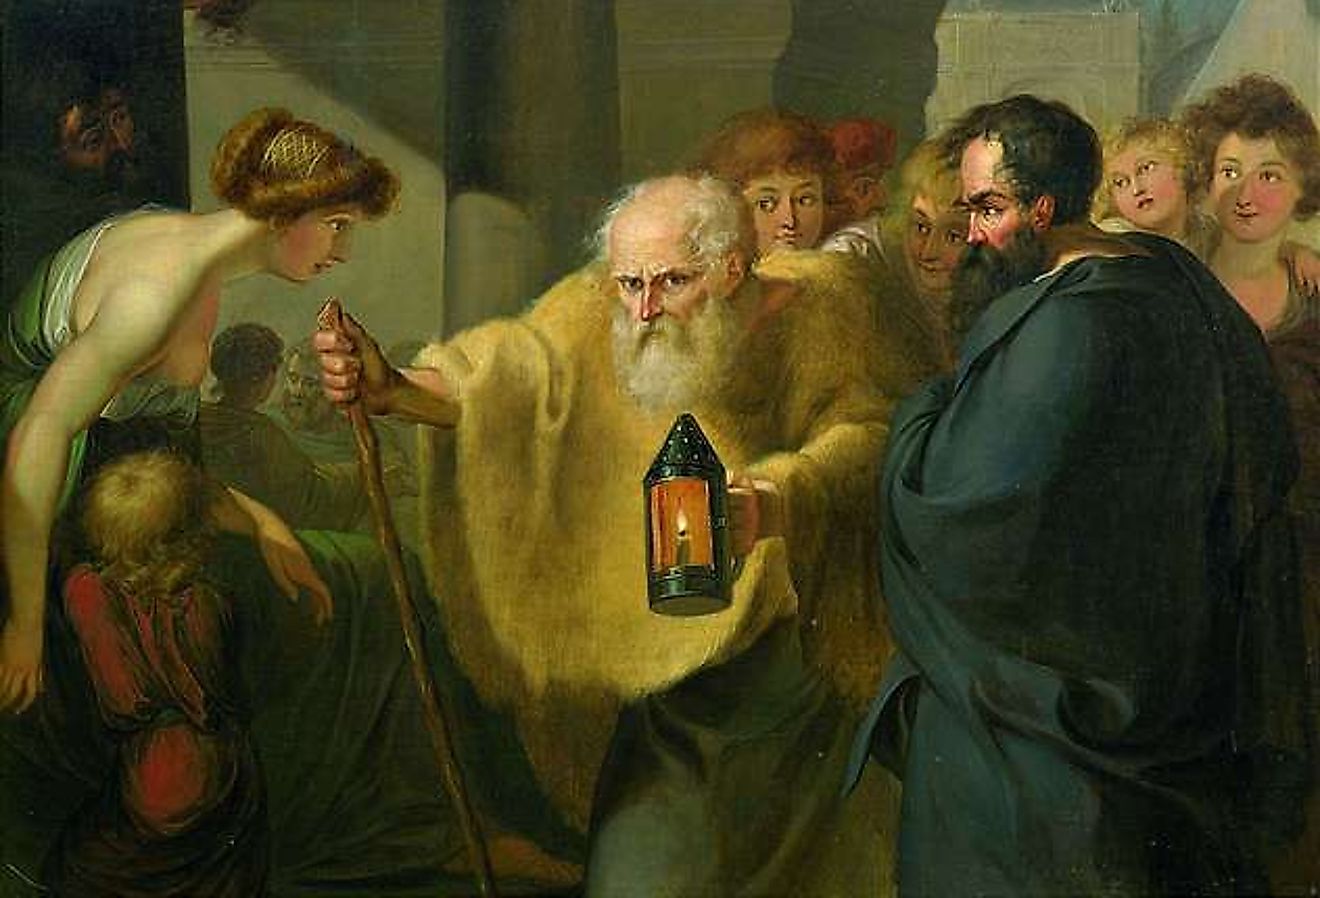 diogenes-looking-for-a-man-attributed-to-jhw-tischbein.jpg